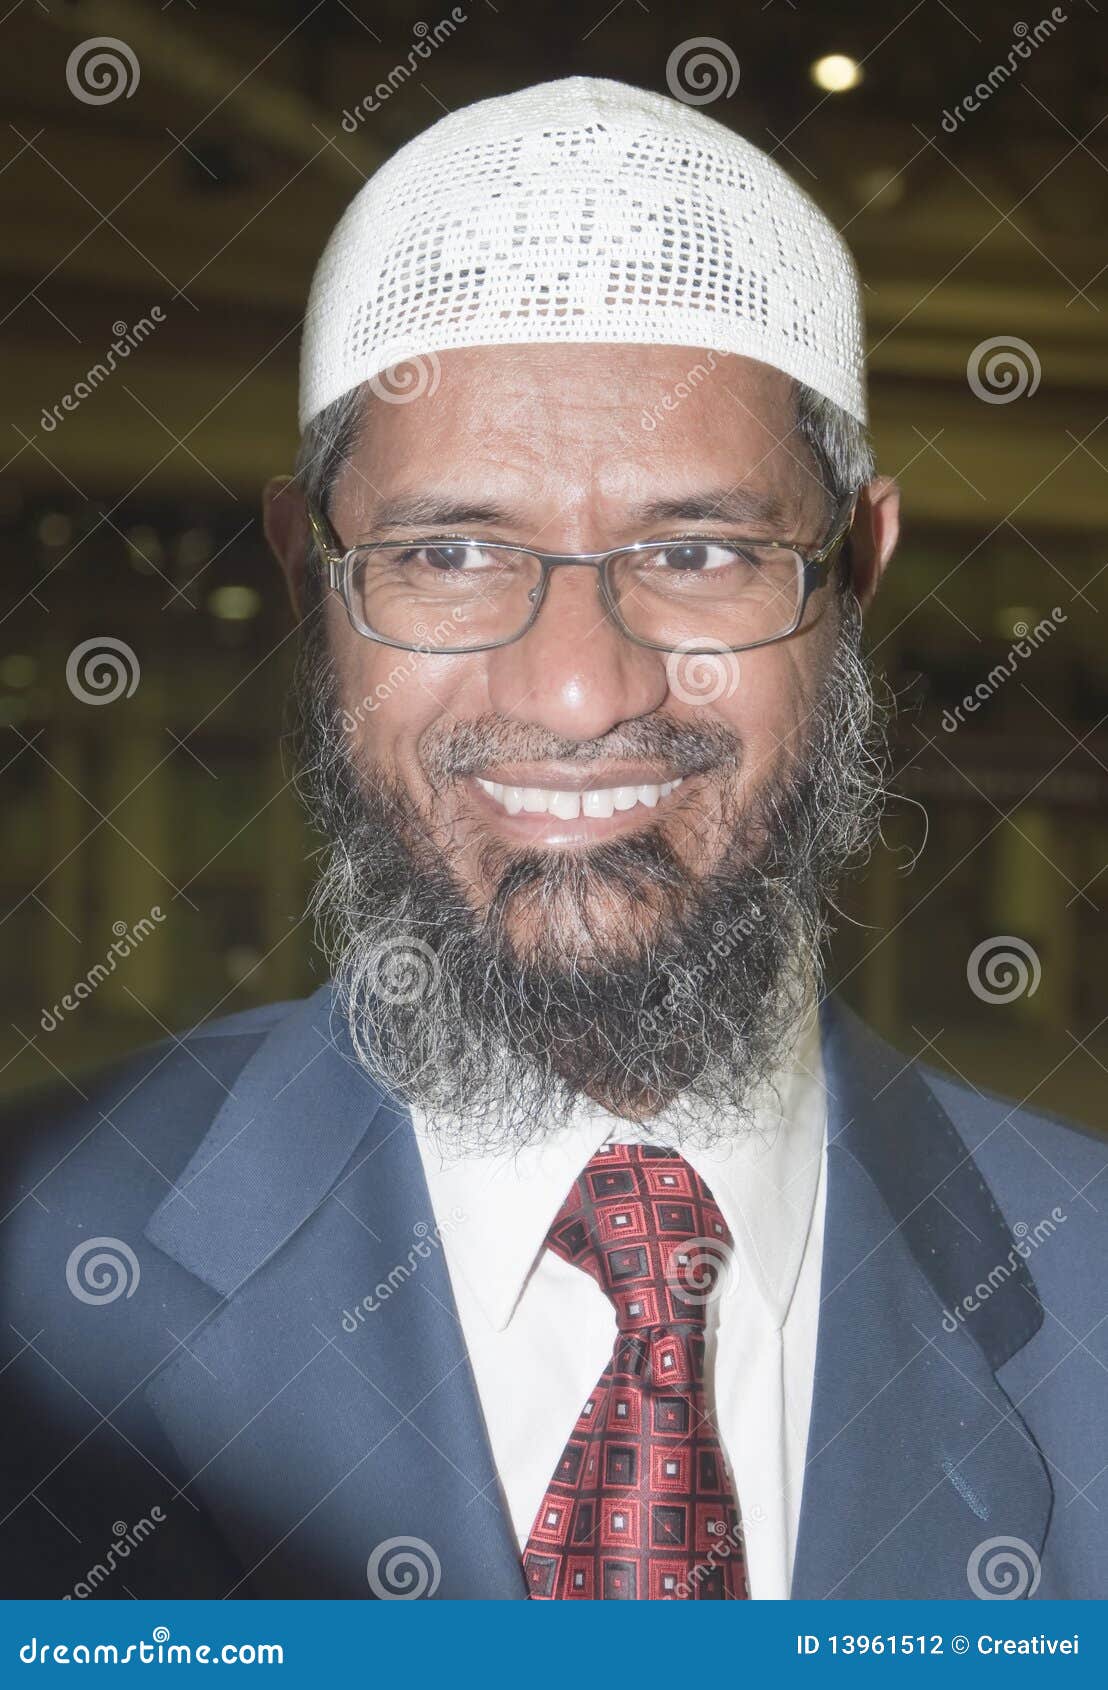 DUBAI, UAE - MARCH 18: Zakir Abdul Karim Naik is a Muslim apologist, public speaker, and writer on the subject of Islam and other comparative religion ... - zakir-abdul-karim-naik-muslim-apologist-13961512